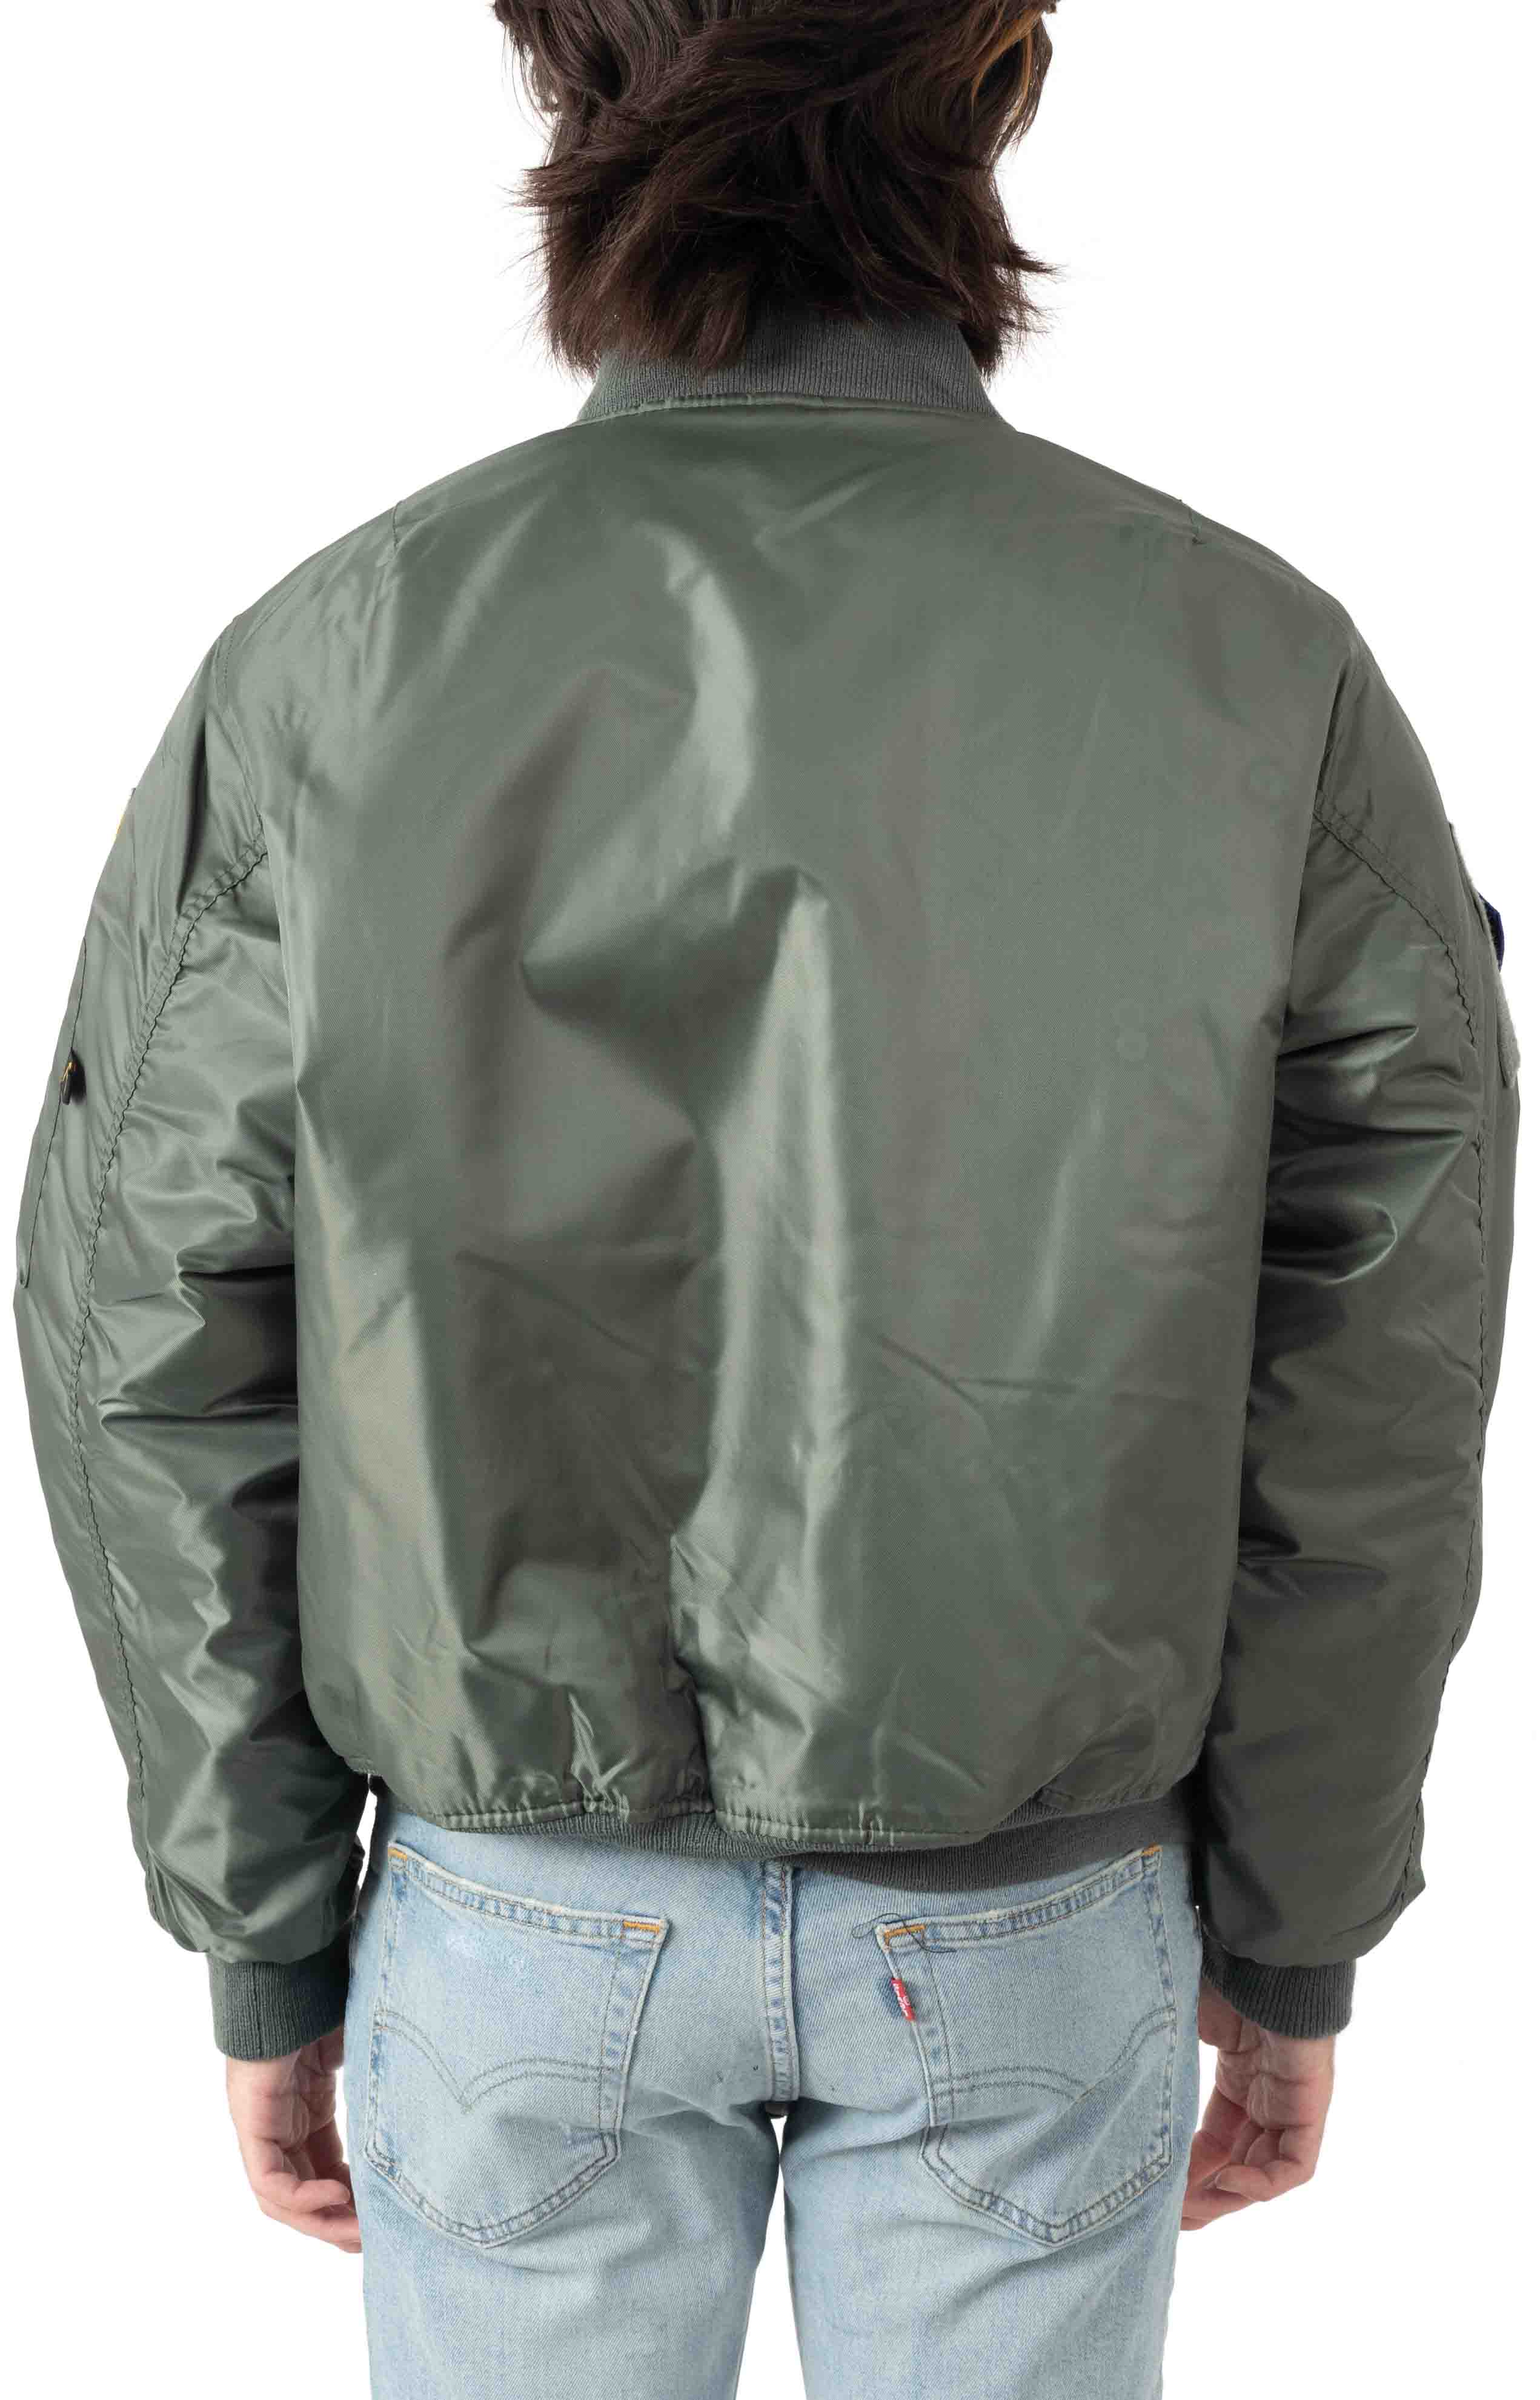 (7240) Rothco MA-1 Flight Jacket with Patches - Sage